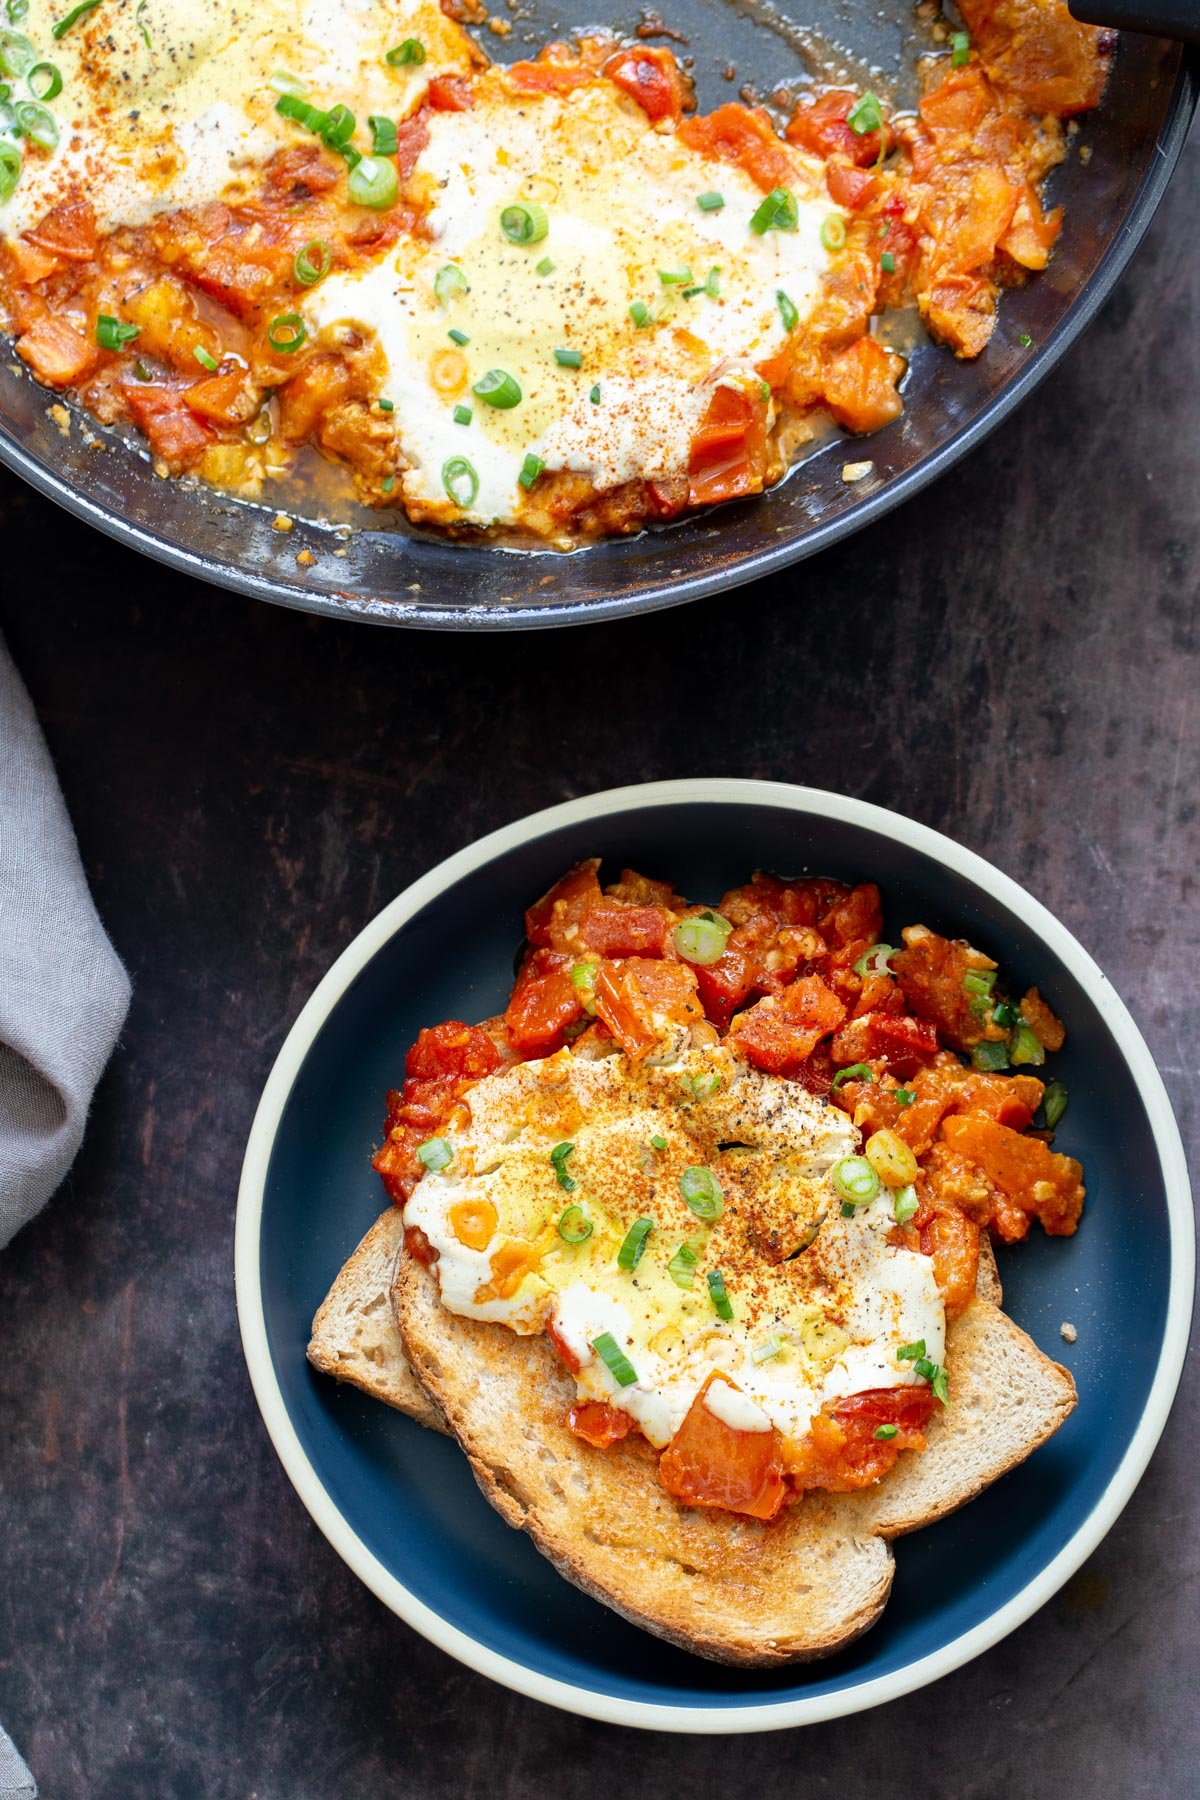 vegan eggs in purgatory served with slices of crust bread